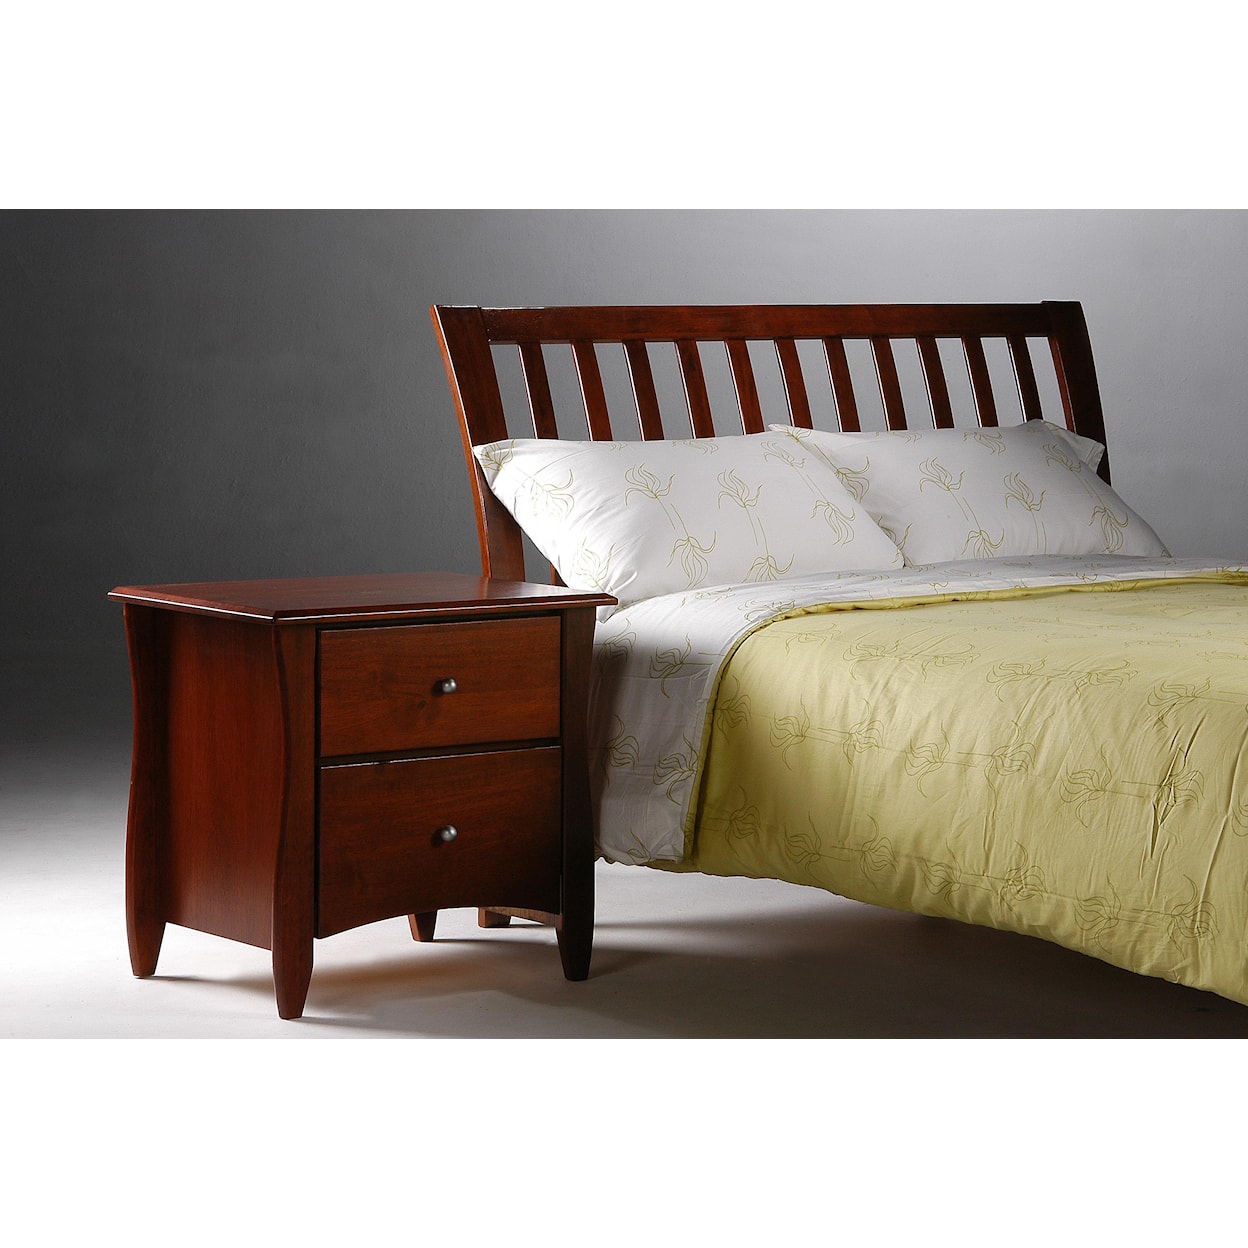 Night & Day Furniture Spice Queen Bed